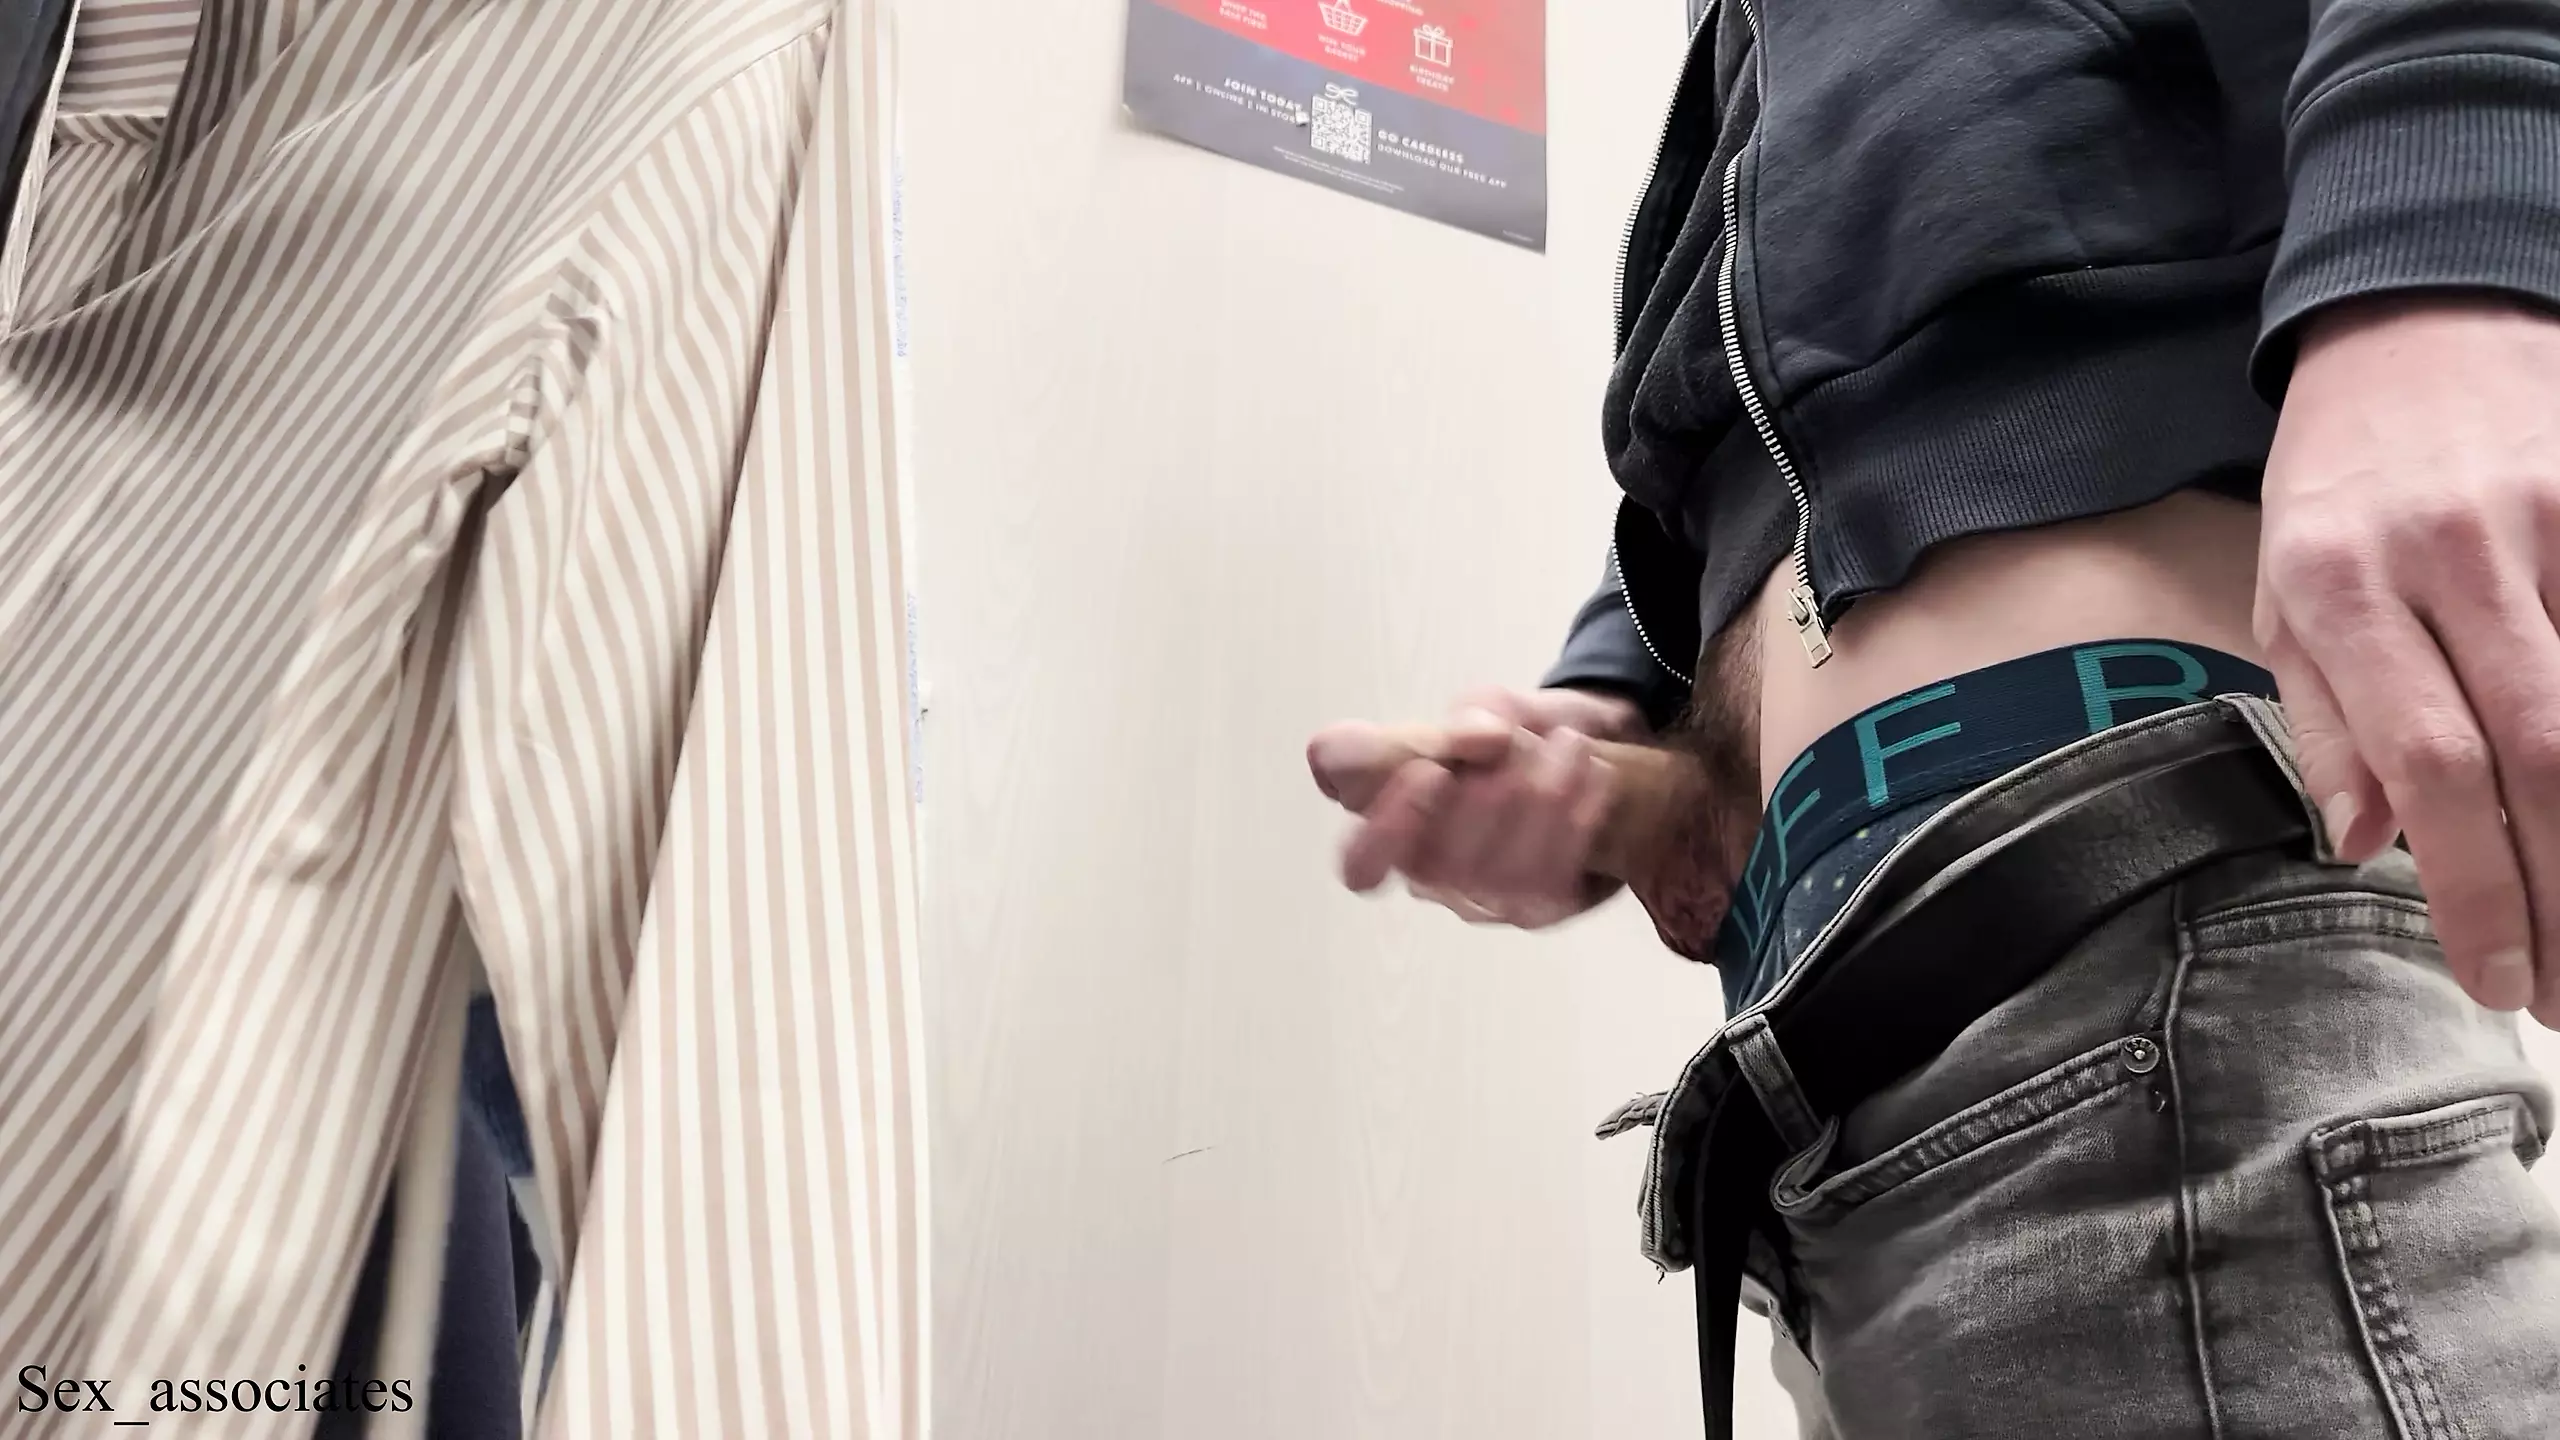 Public Dick Flash In Front Of The Store Assistant In Westfield, London, Ended Up With A Blowjob In The Changing Room